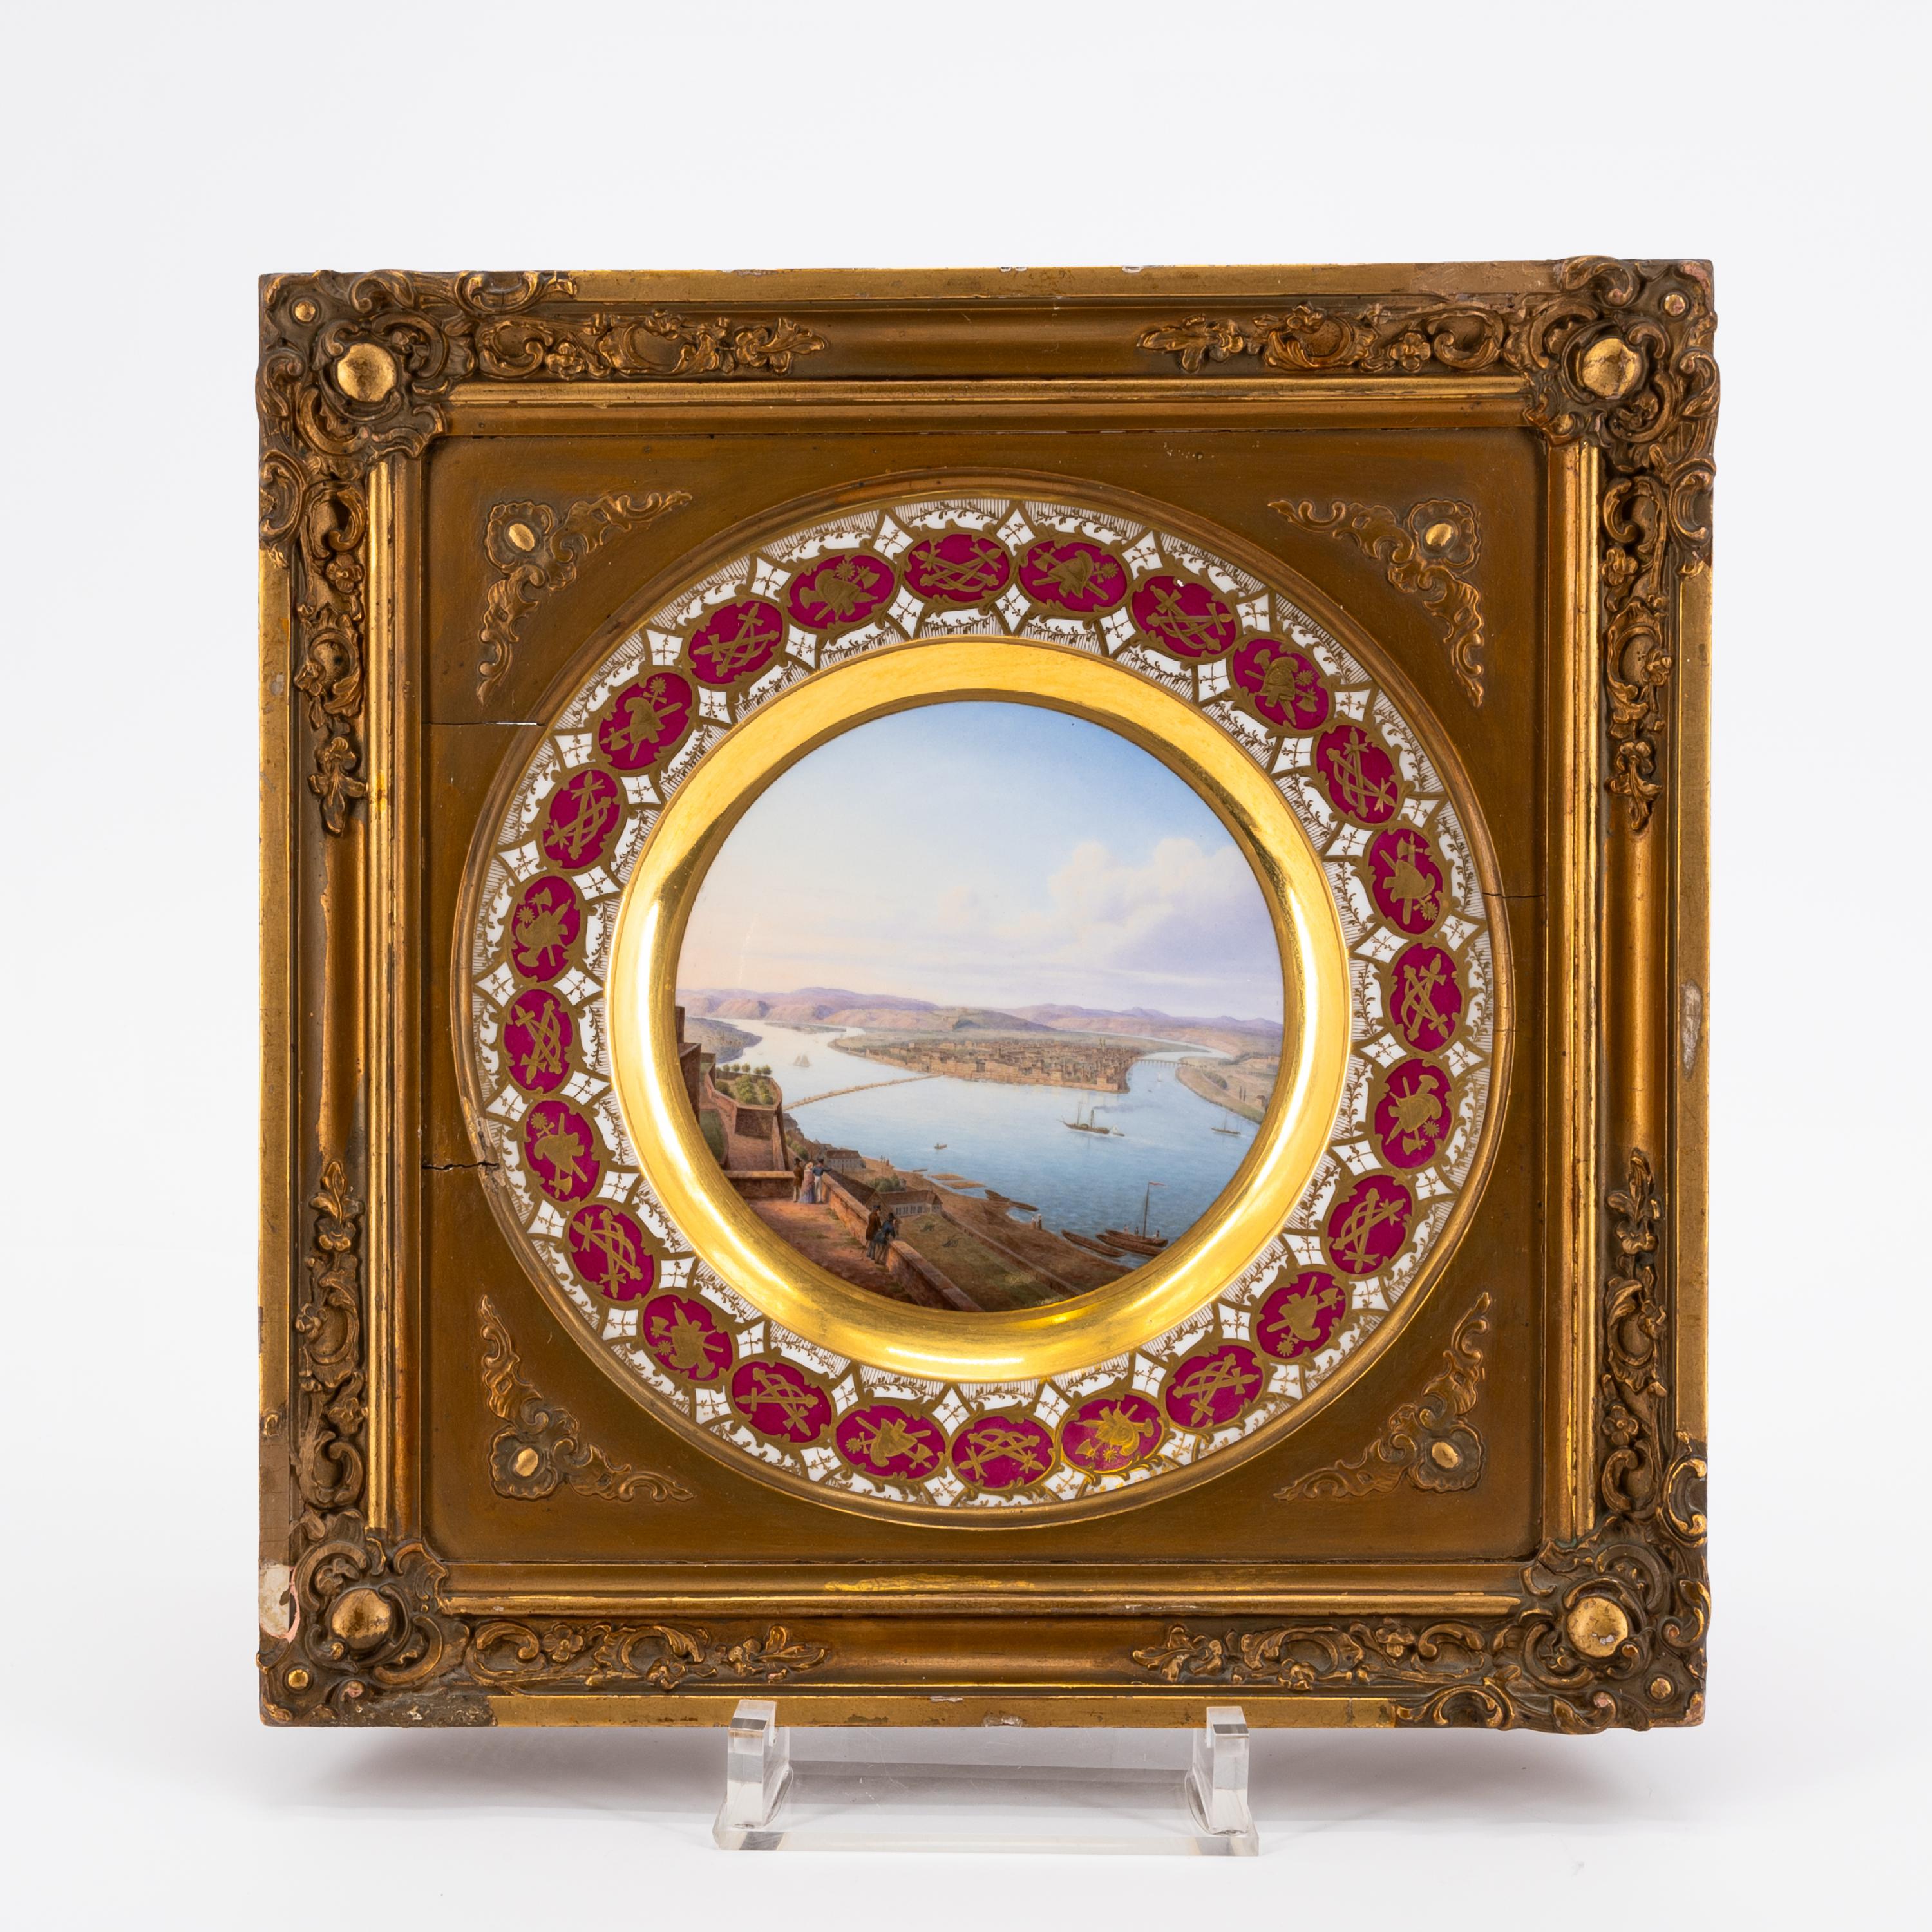 EXEPTIONAL SERIES OF TWELVE PORCELAIN PLATES WITH ROMANTIC VIEWS OF THE RHINE - Image 7 of 26